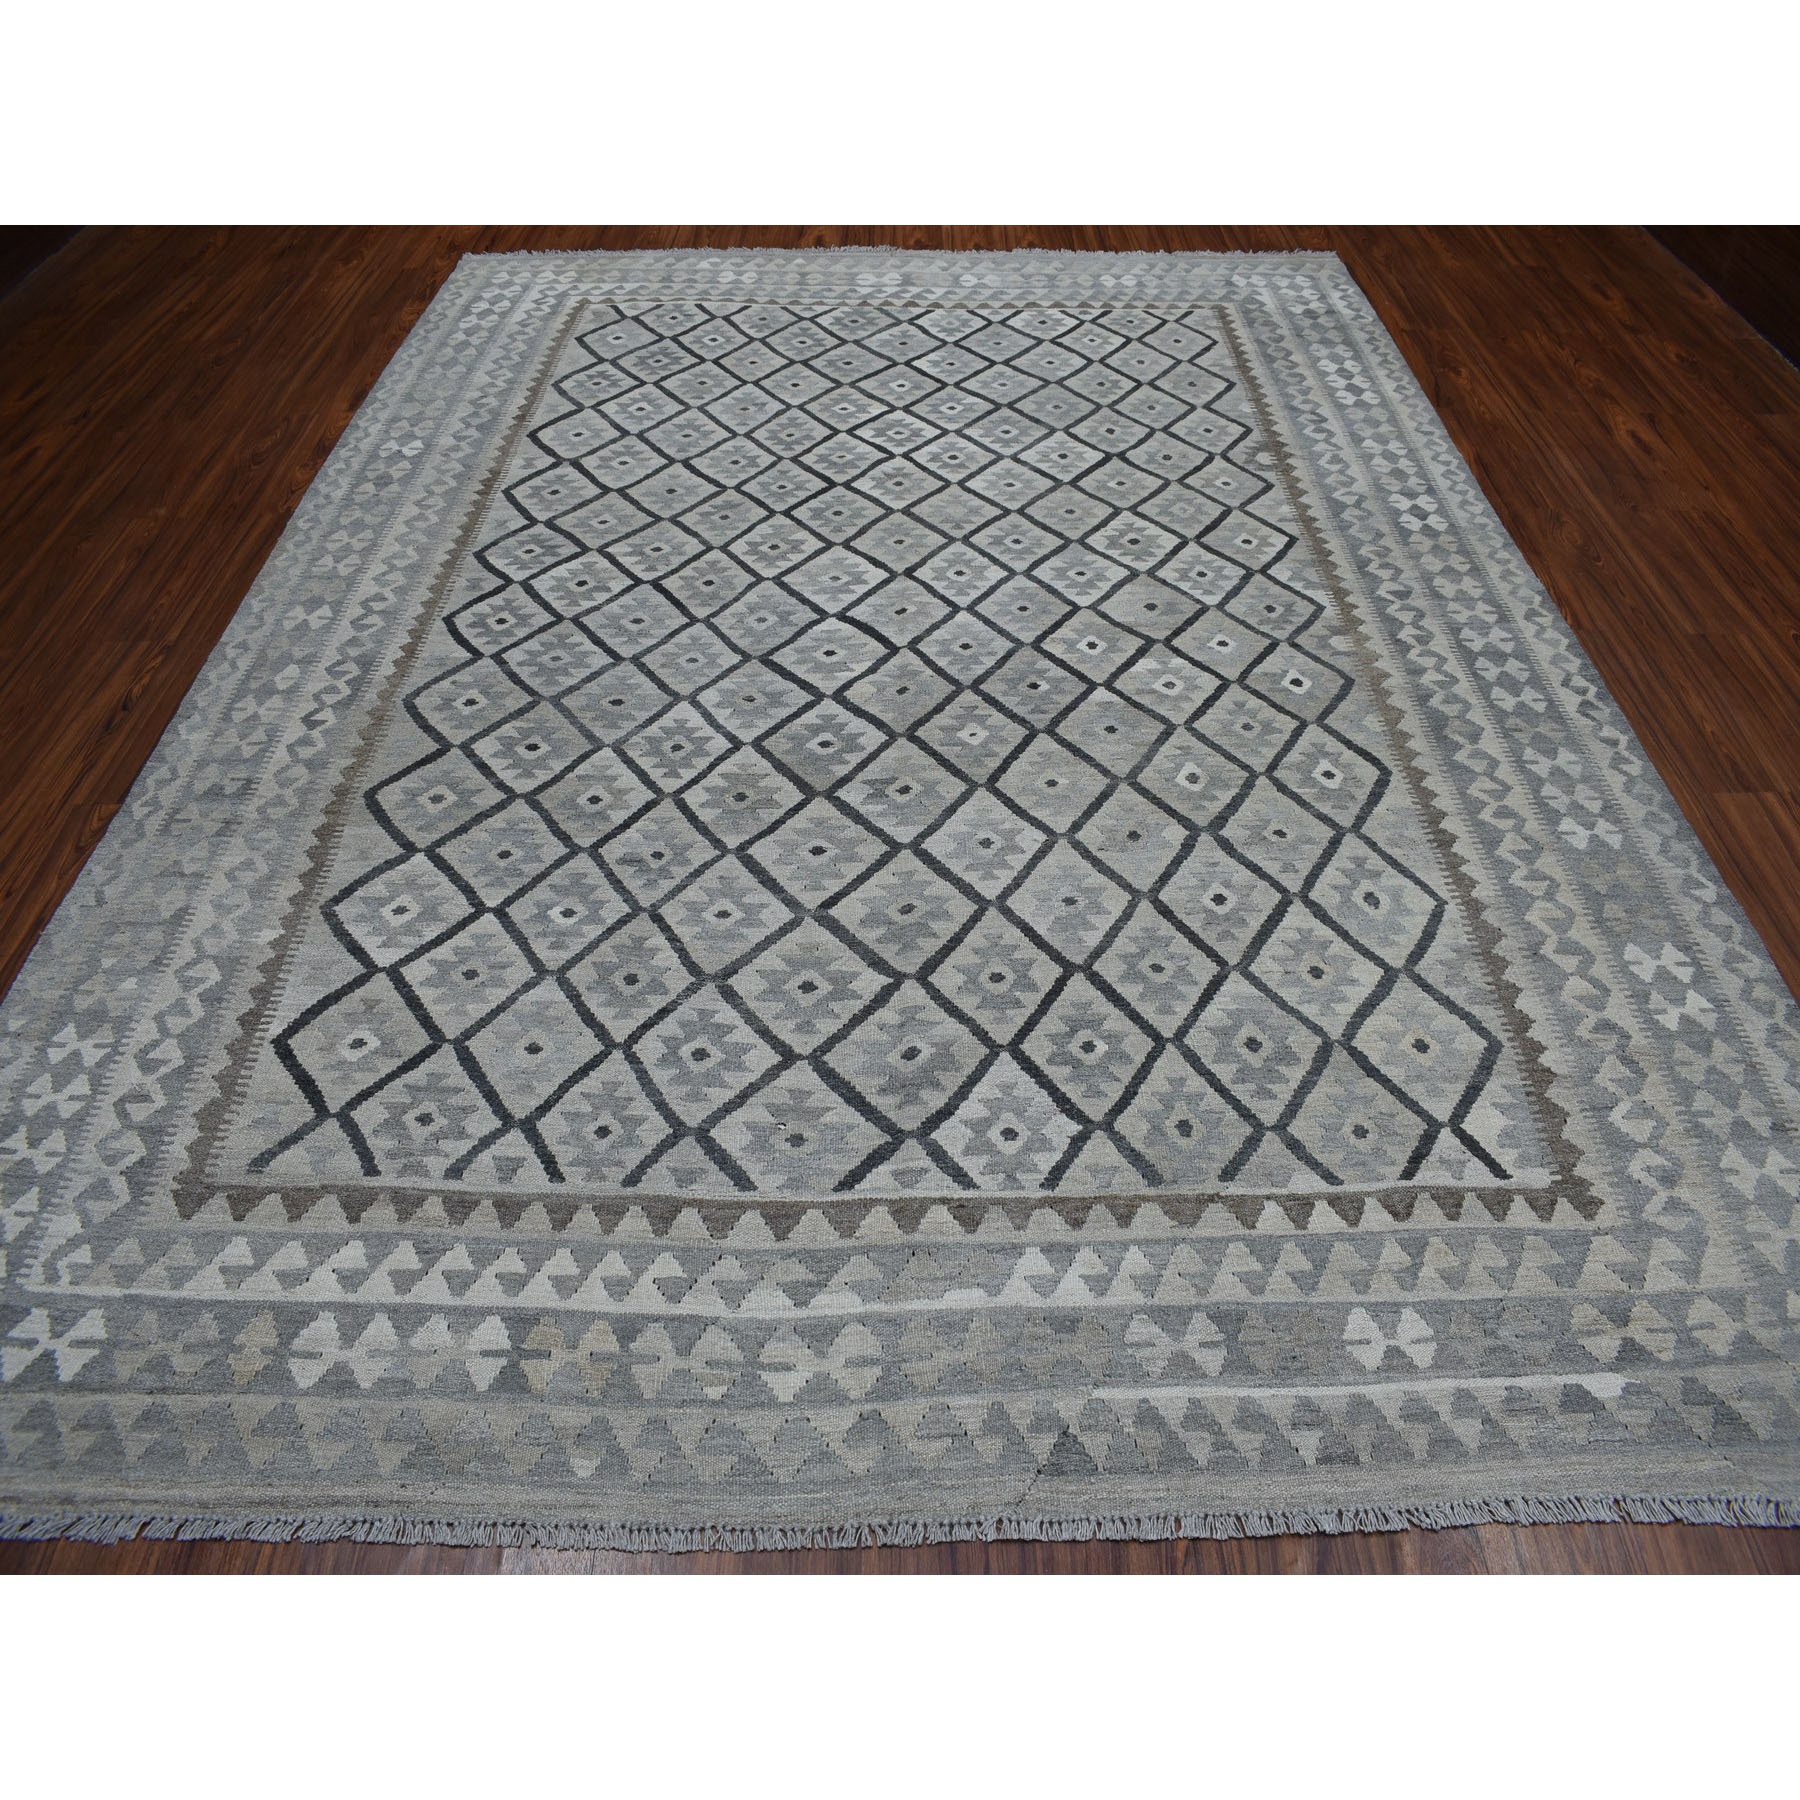 8-5 x11-3  Undyed Natural Wool Afghan Kilim Reversible Hand Woven Oriental Rug 